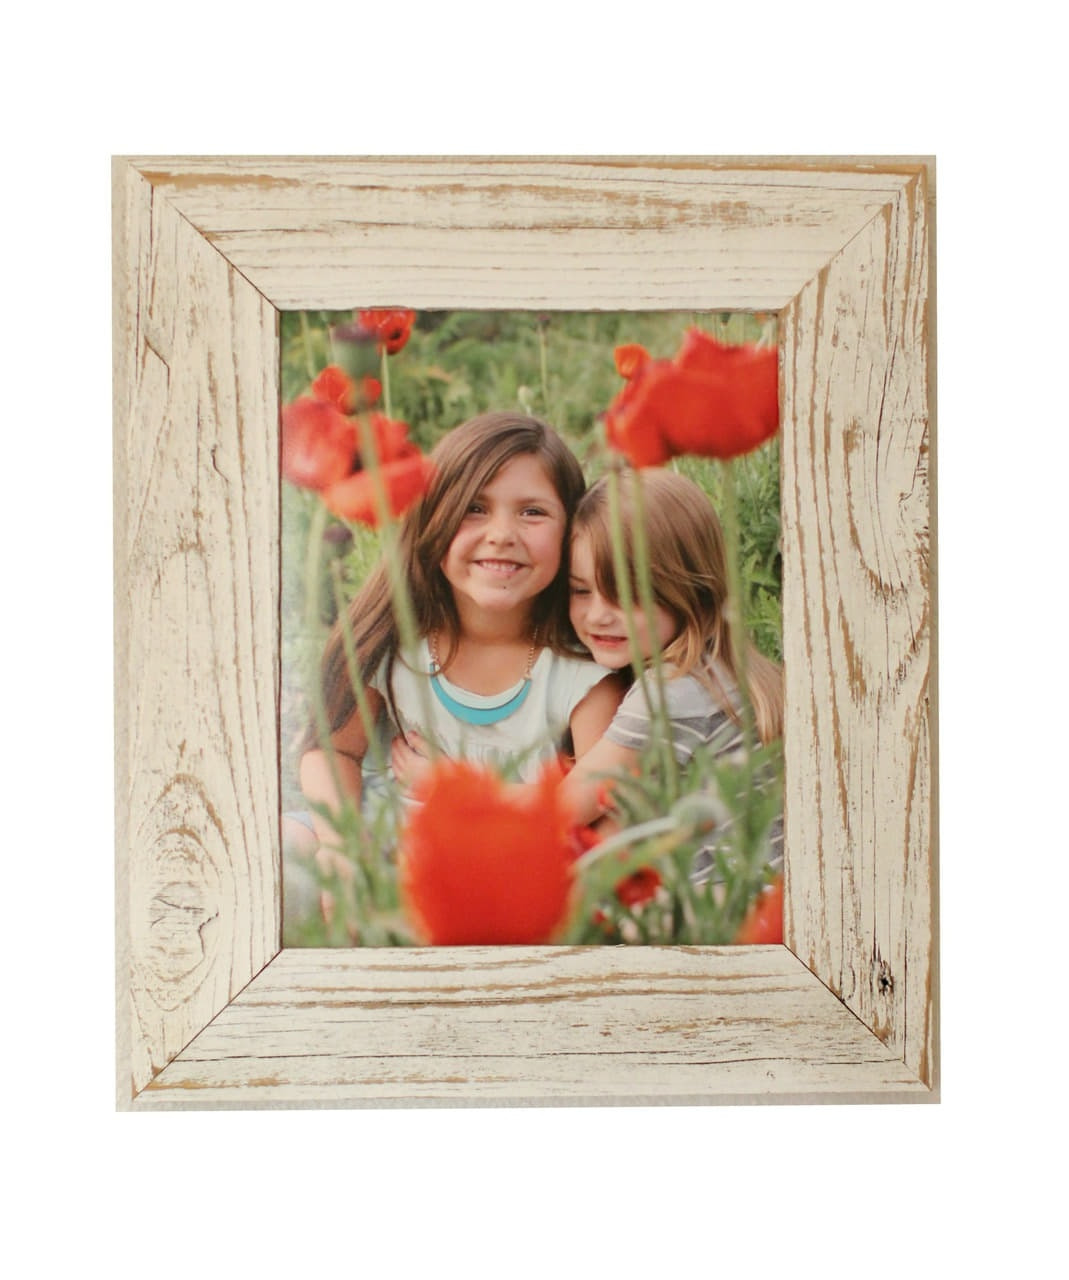 Barnwood Picture Frame with Red Wash, 4x6 Rustic Wood Frame